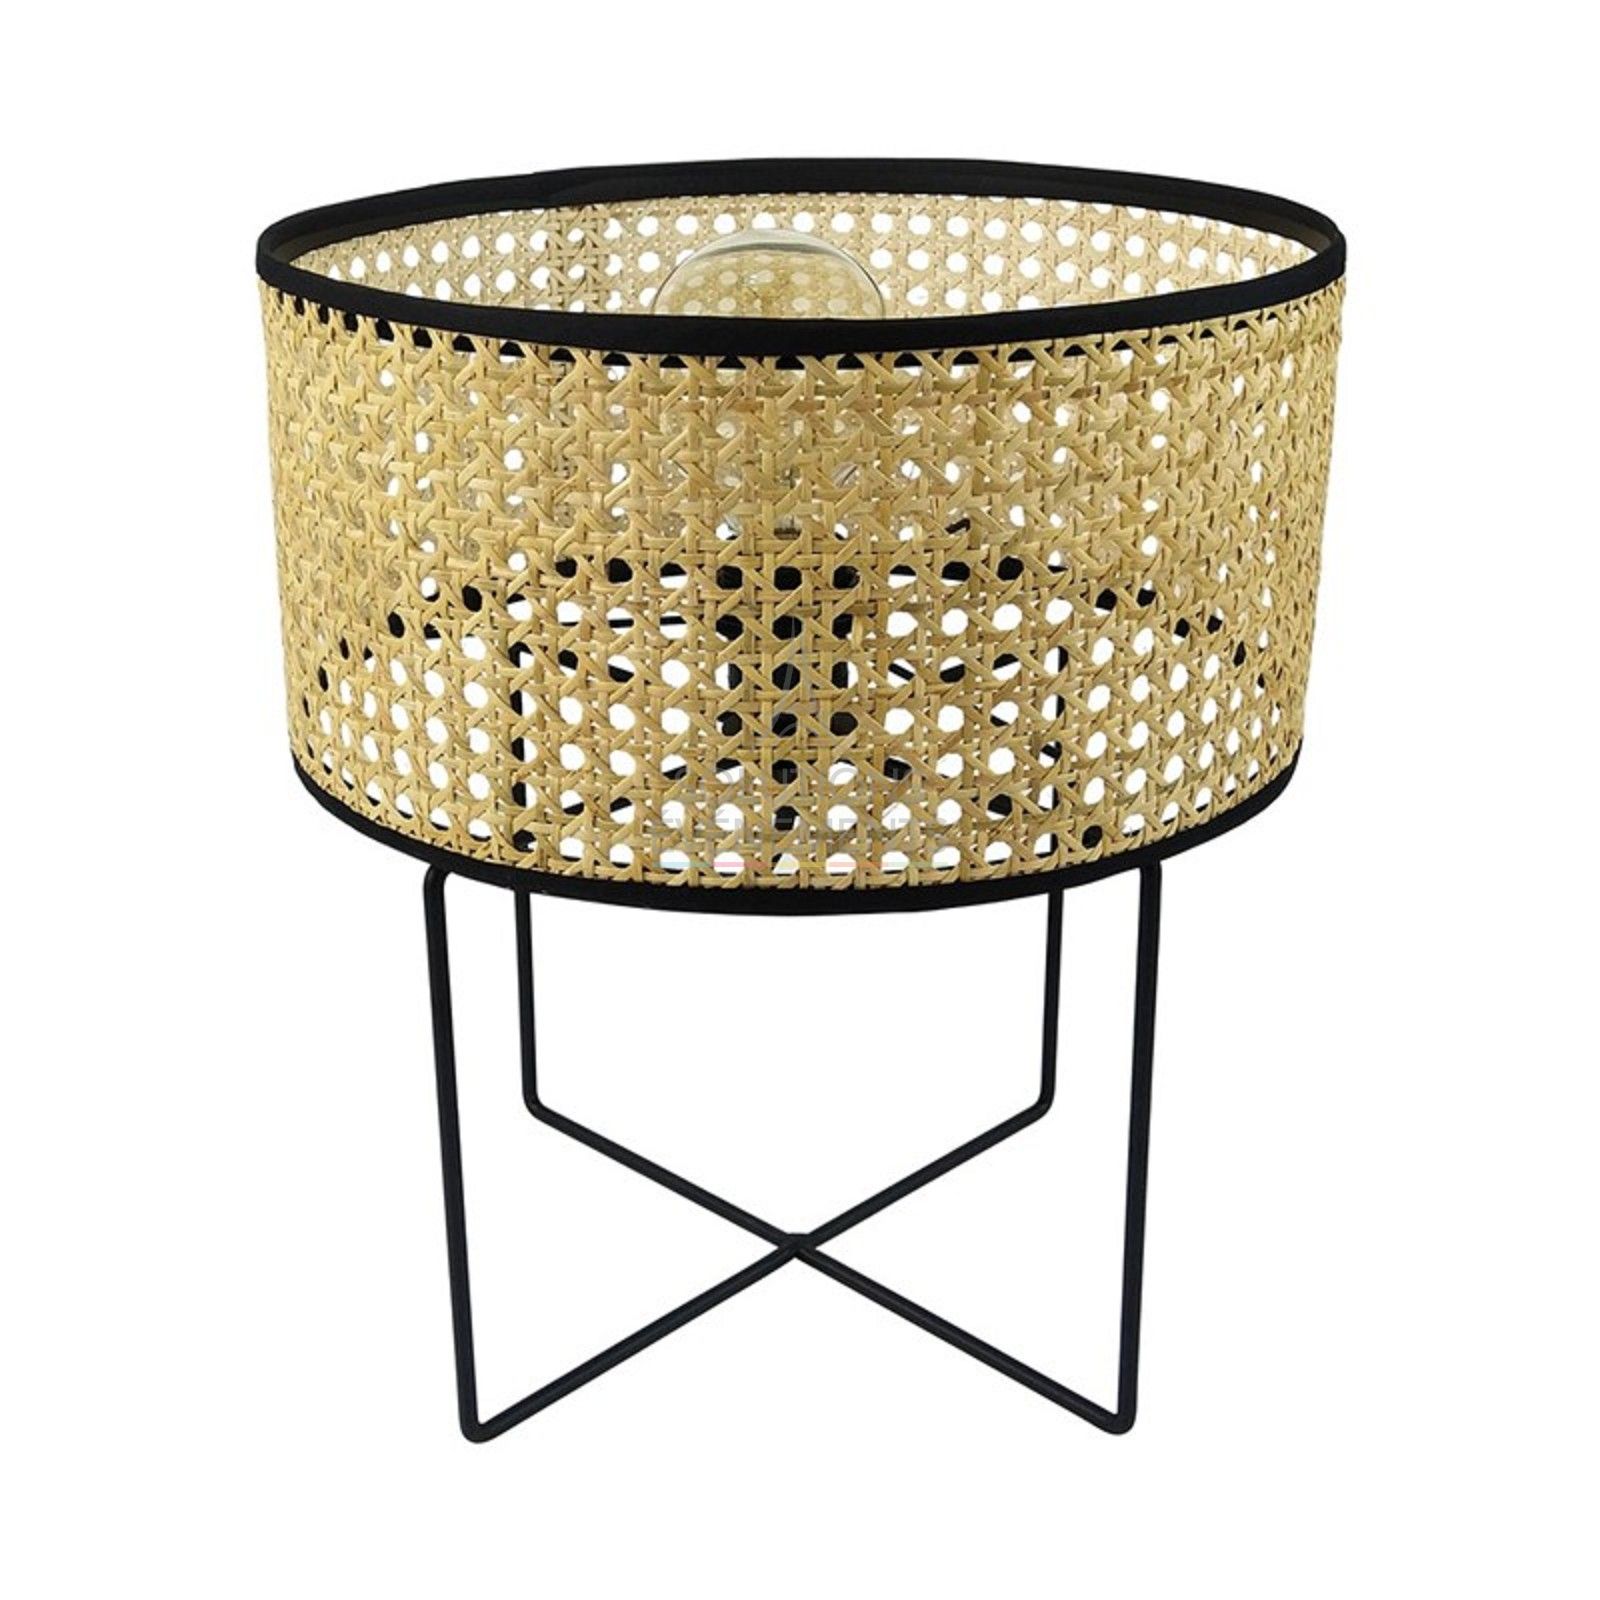 Cane and wicker style table lamp rental.